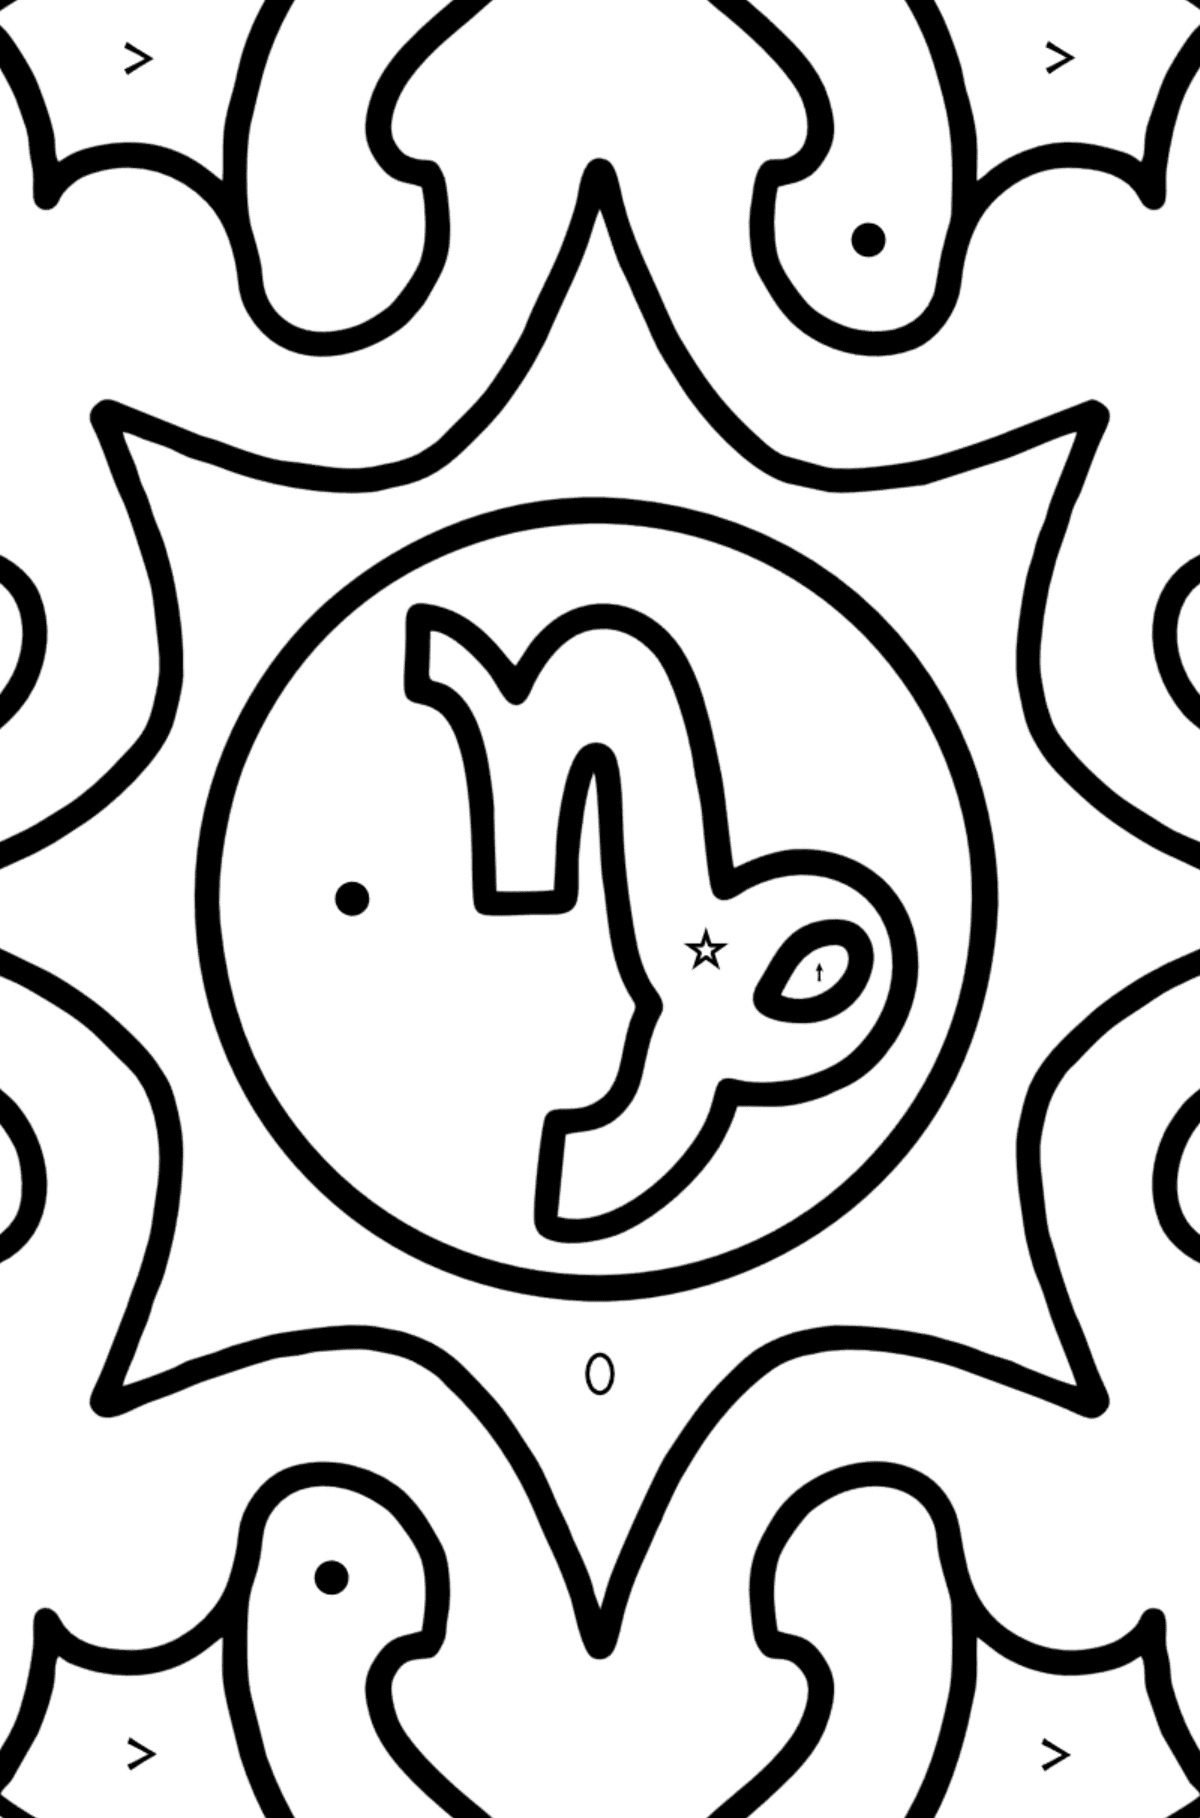 Coloring page - Capricorn zodiac sign - Coloring by Symbols and Geometric Shapes for Kids